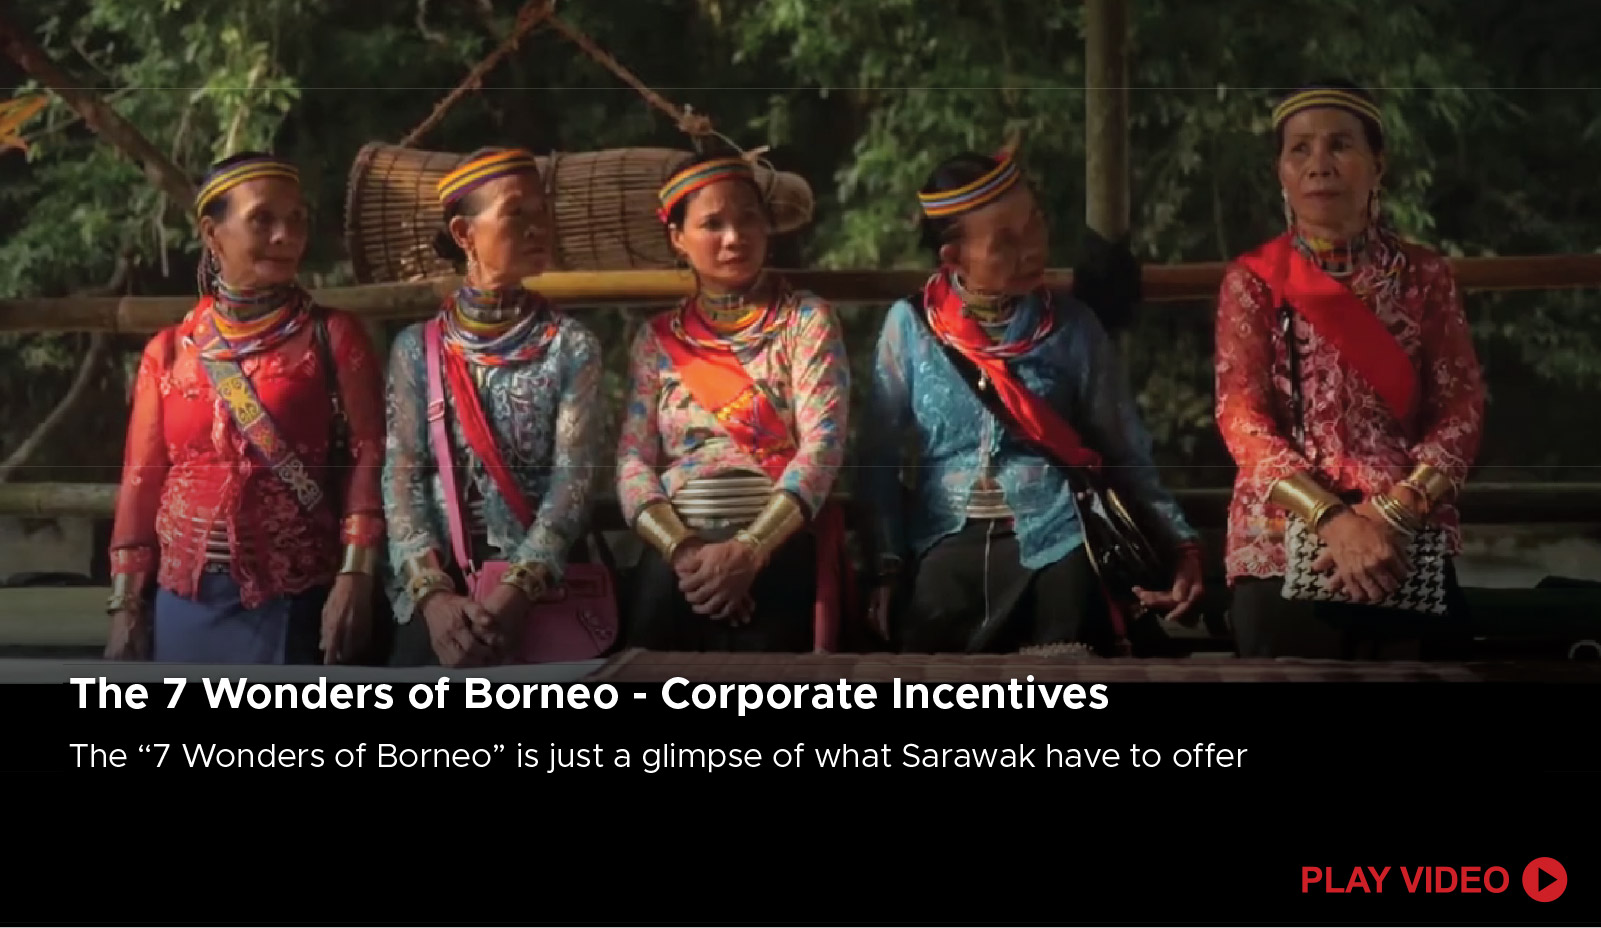 The 7 Wonders of Borneo - Corporate Incentives